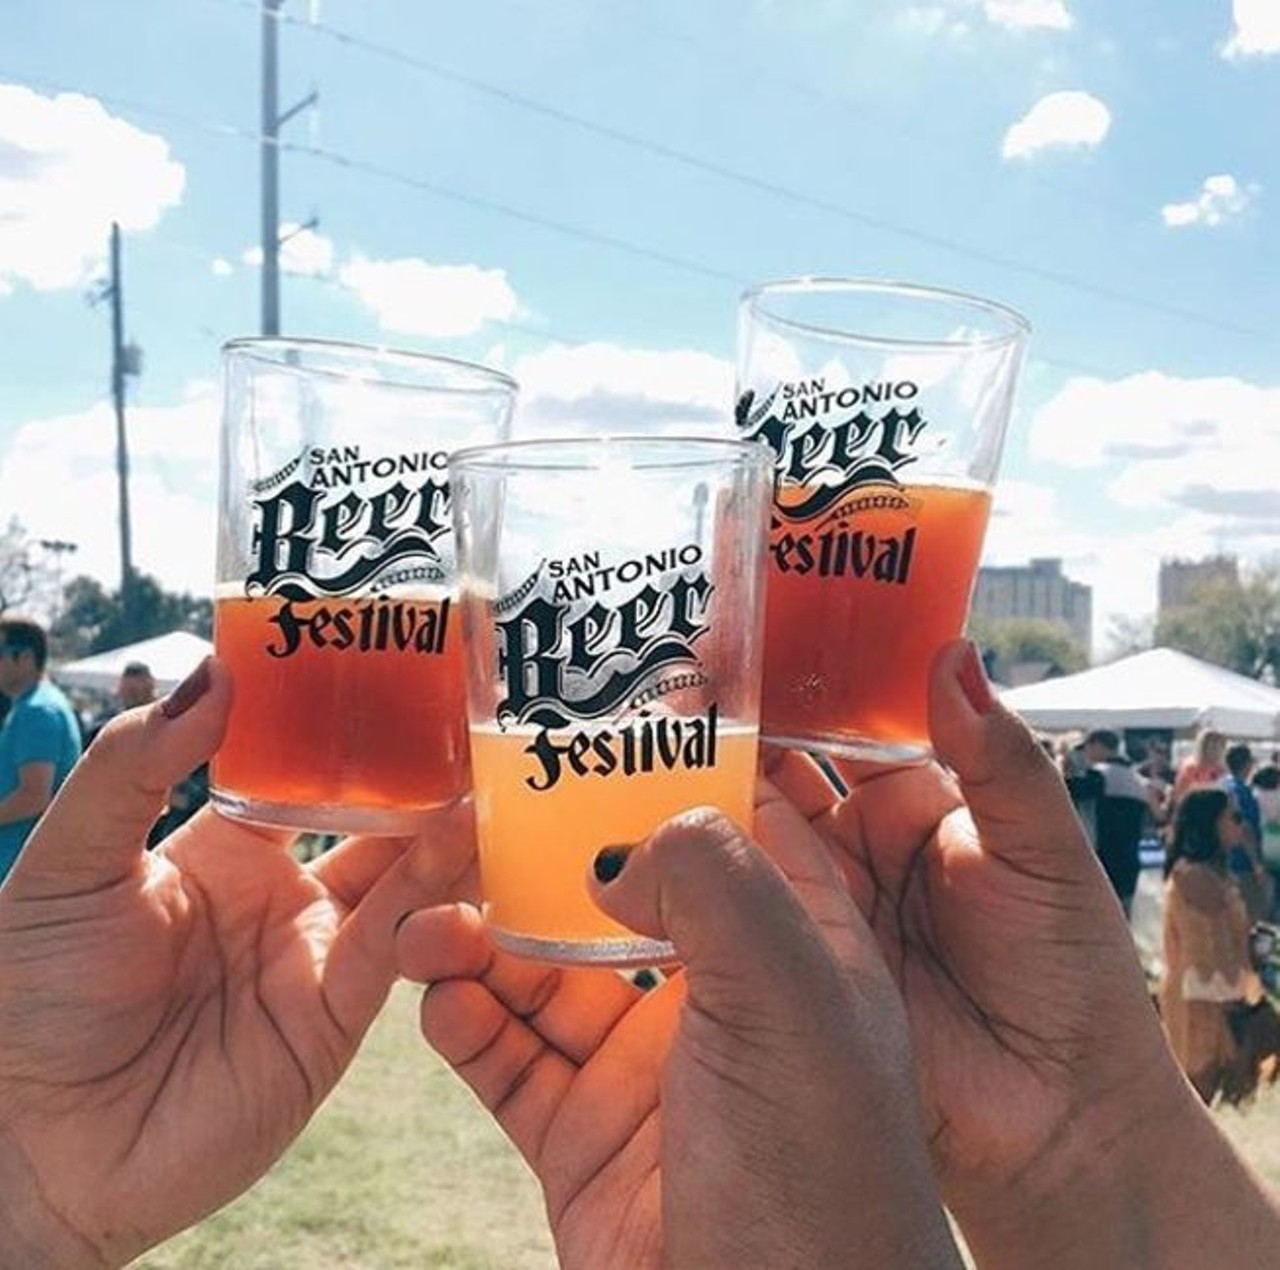 Oct. 21, San Antonio Beer Festival
Dignowity and Lockwood Parks, sanantoniobeerfestival.com
So we might be a little biased, but we promise this booze-infused fest is not one to miss. Take your pick from more than 400 craft and premium beers from all over the world, all in one place.
Photo via Instagram, sacurrent